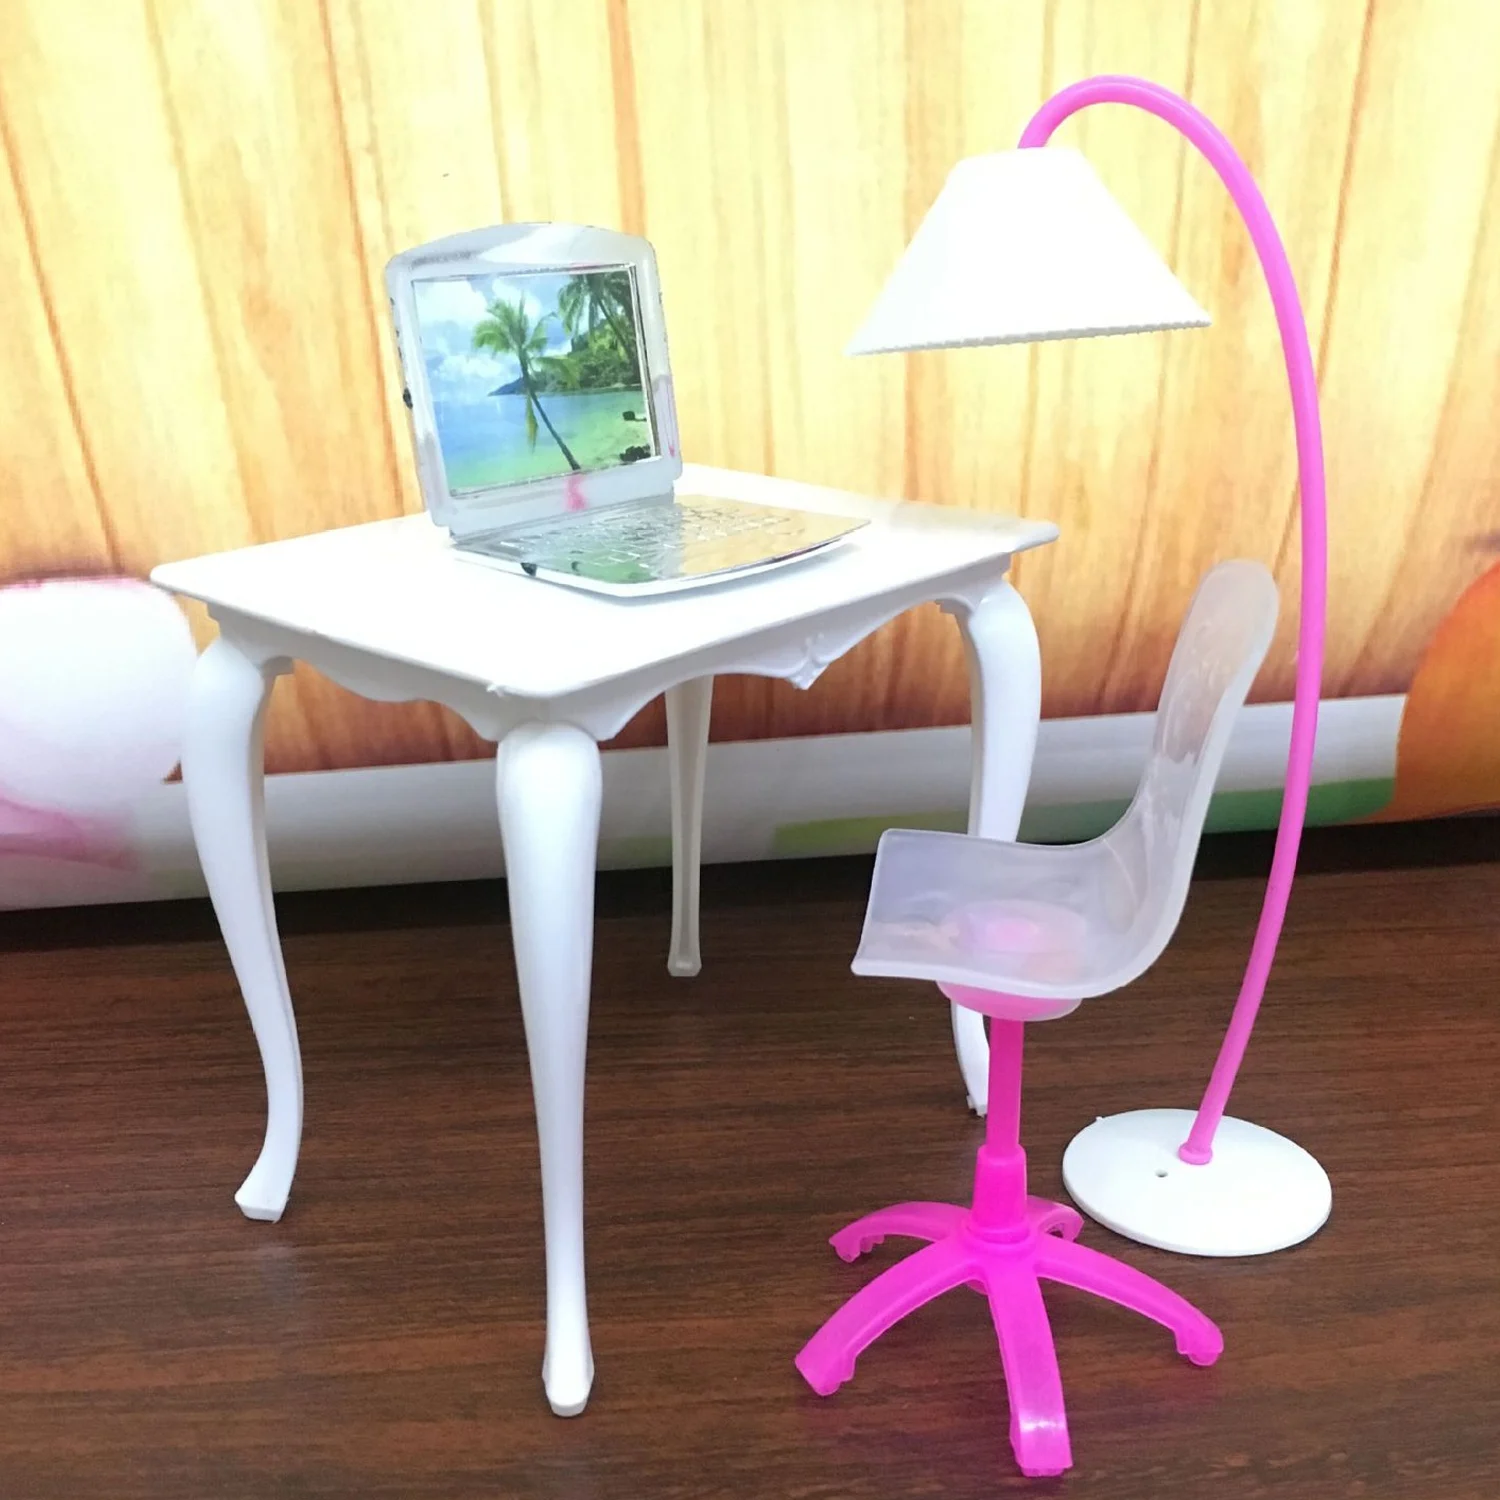 4PCS Simulation Office Table Lamp Laptop Chair Doll House Furniture for Barbie Doll Furniture Accessories Kids Christmas Gift